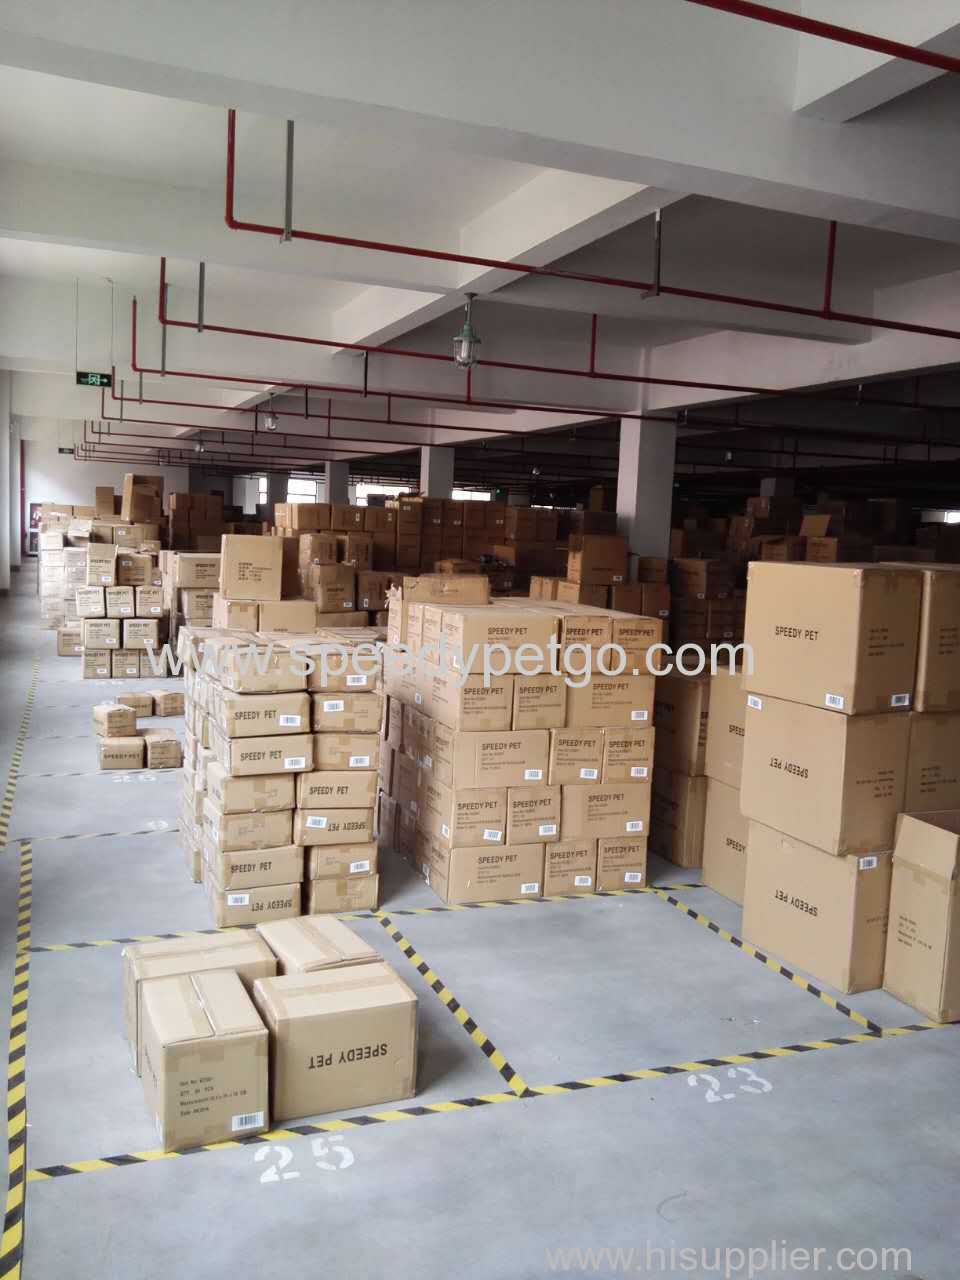 Our Warehouse Pictures